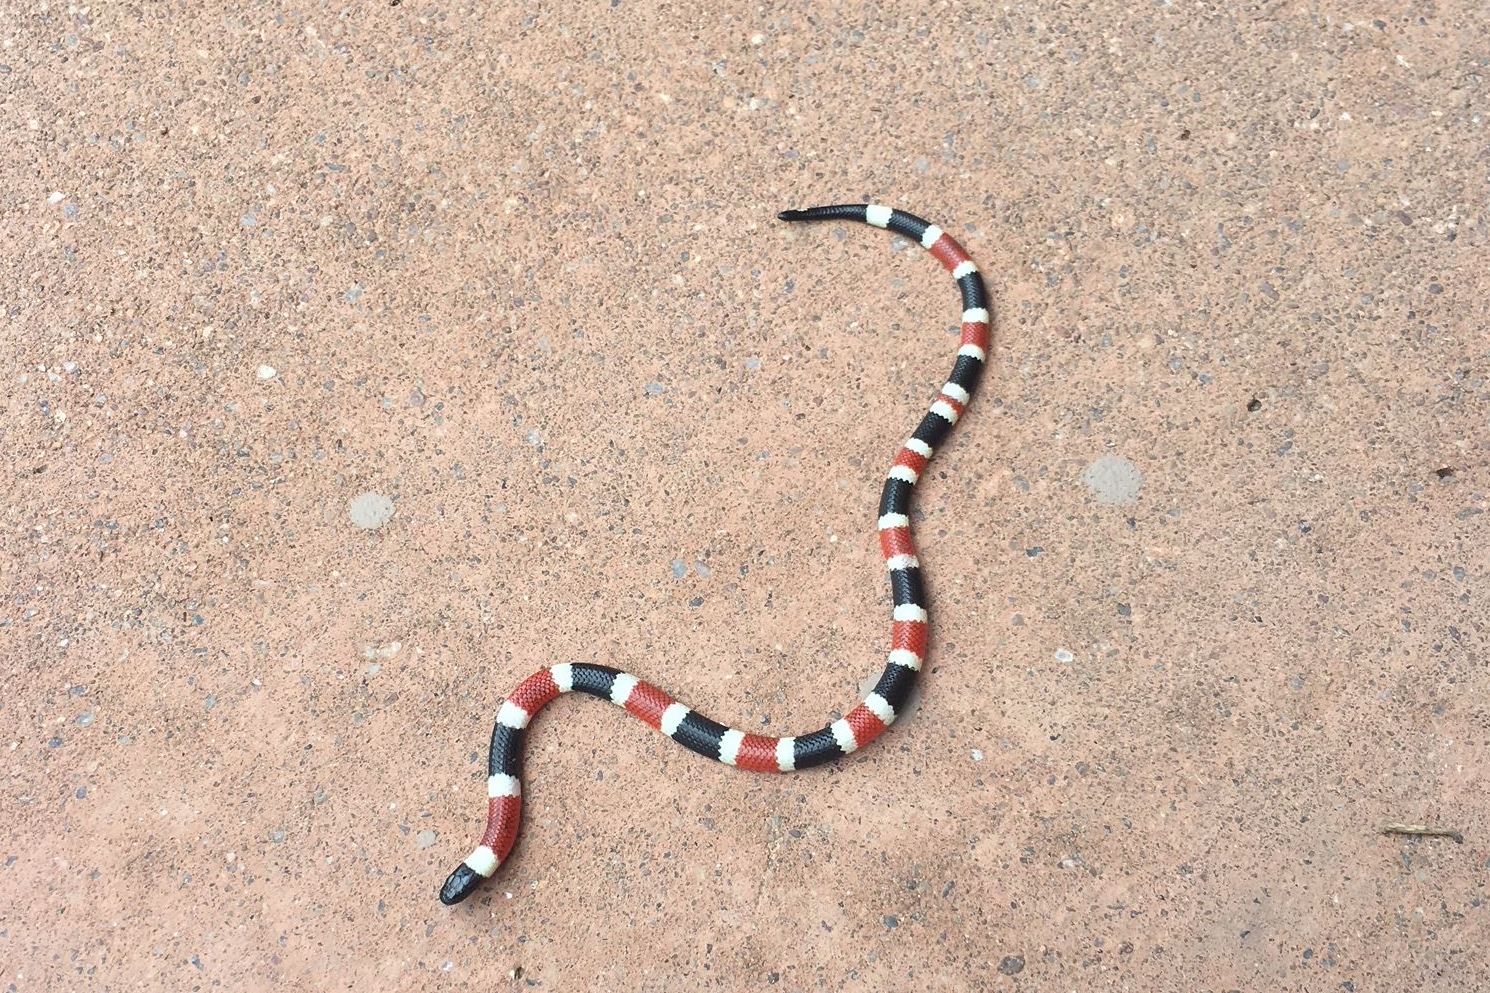 A coral snake with bands of red, white and black on the ground